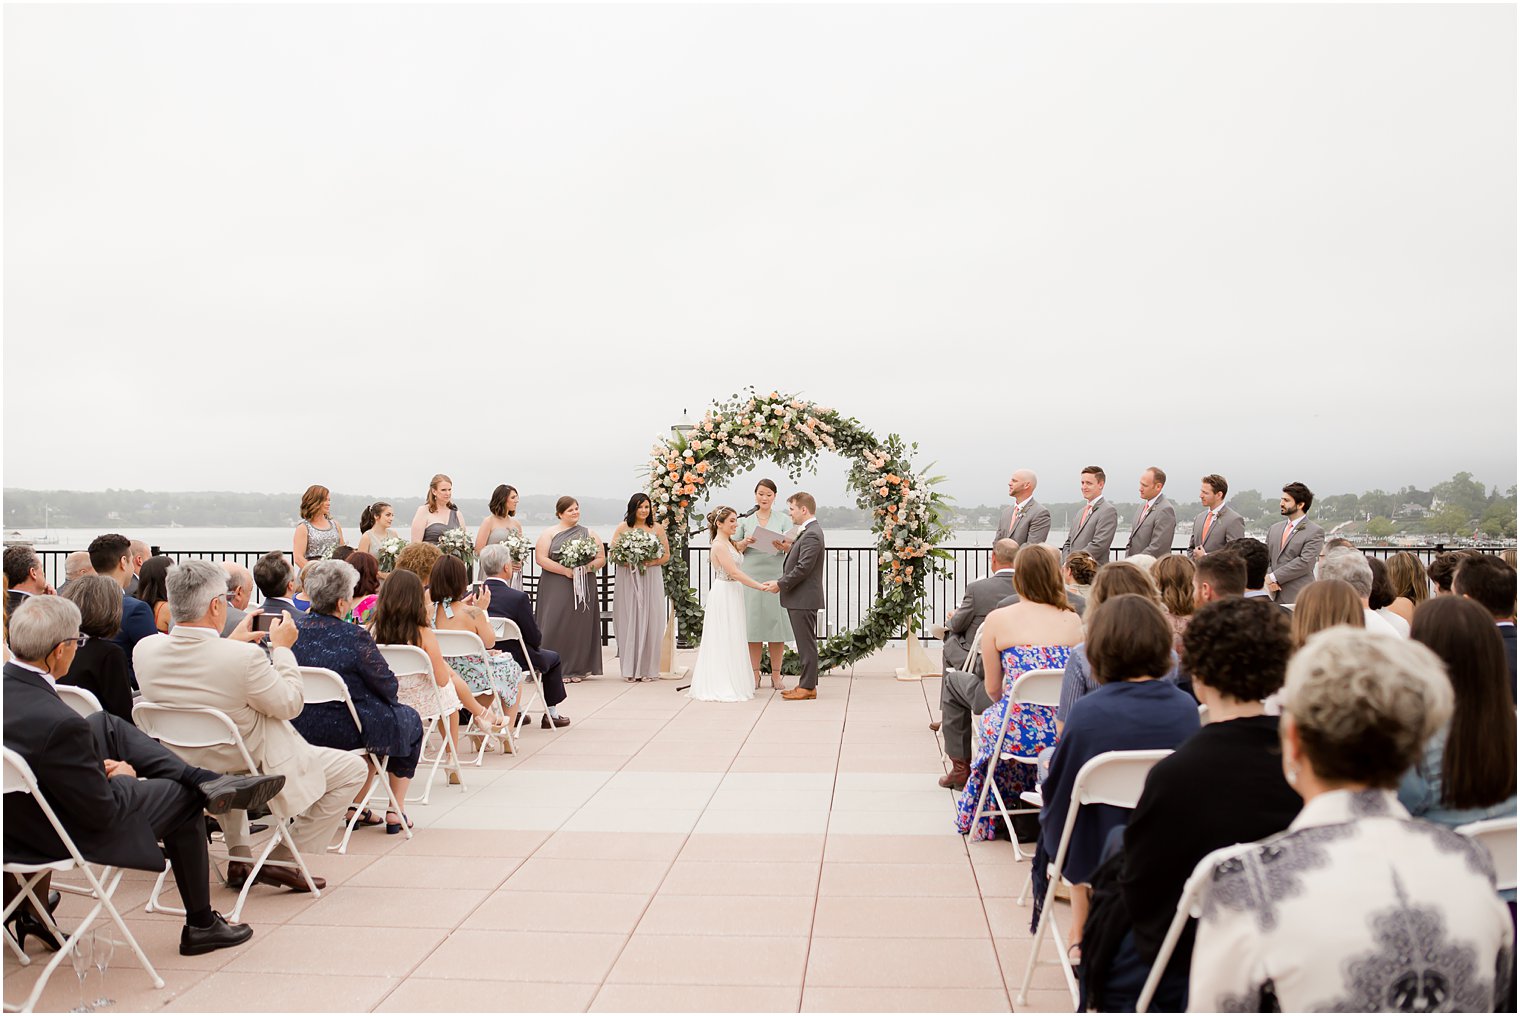 Outdoor ceremony at the Molly Pitcher Inn in Red Bank, NJ